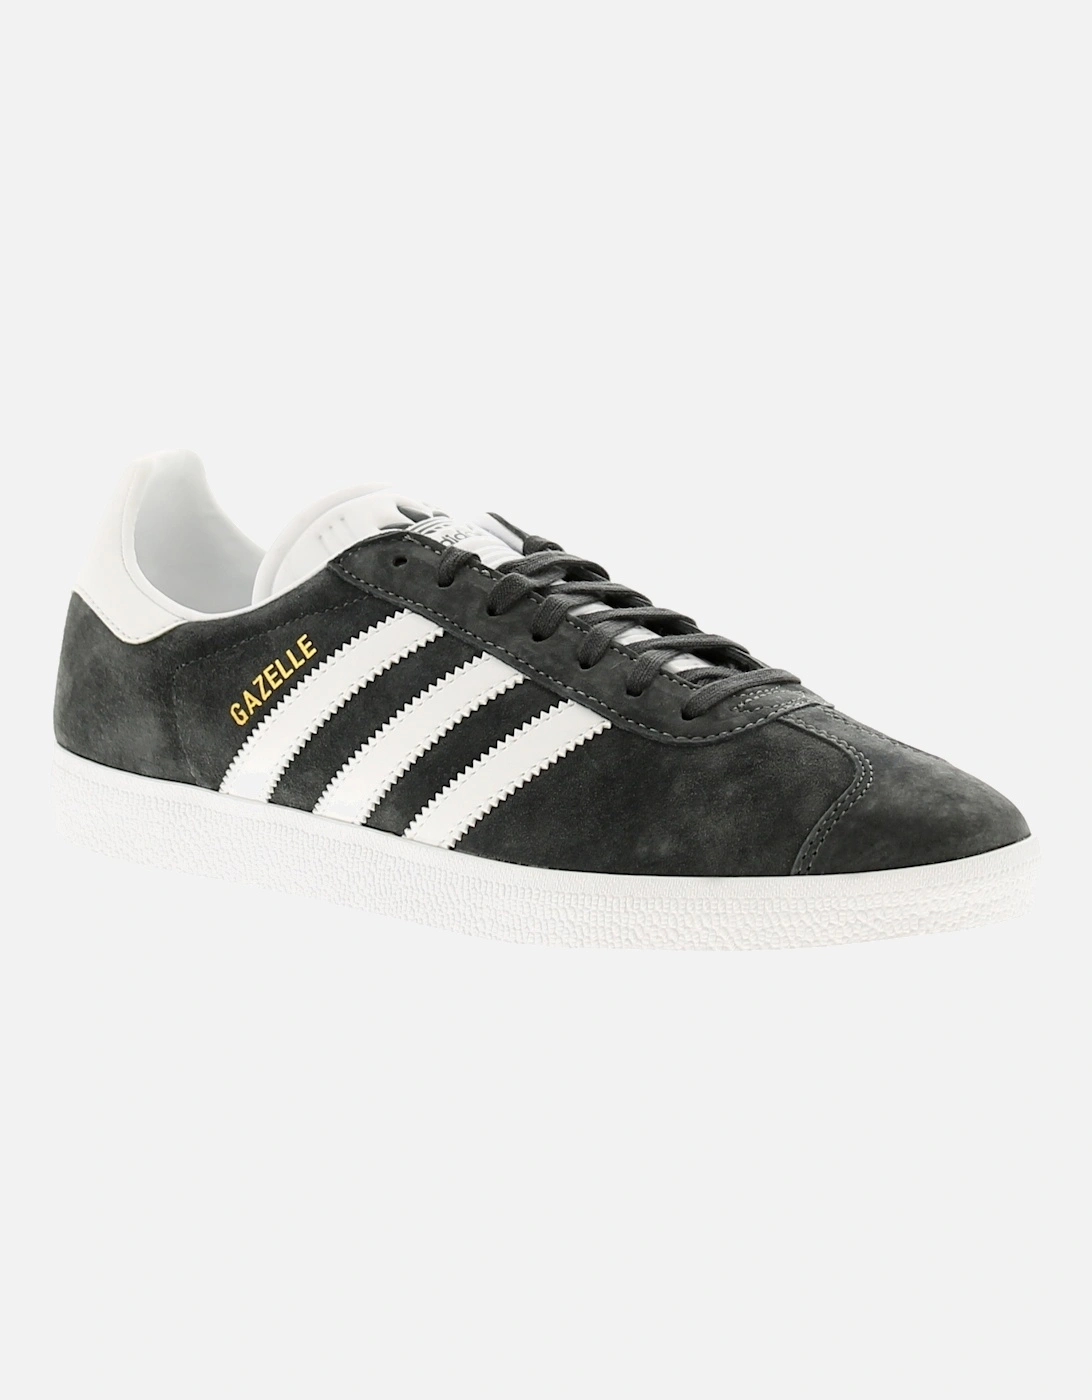 Adidas Originals Mens Trainers Gazelle Leather Lace Up grey UK Size, 6 of 5